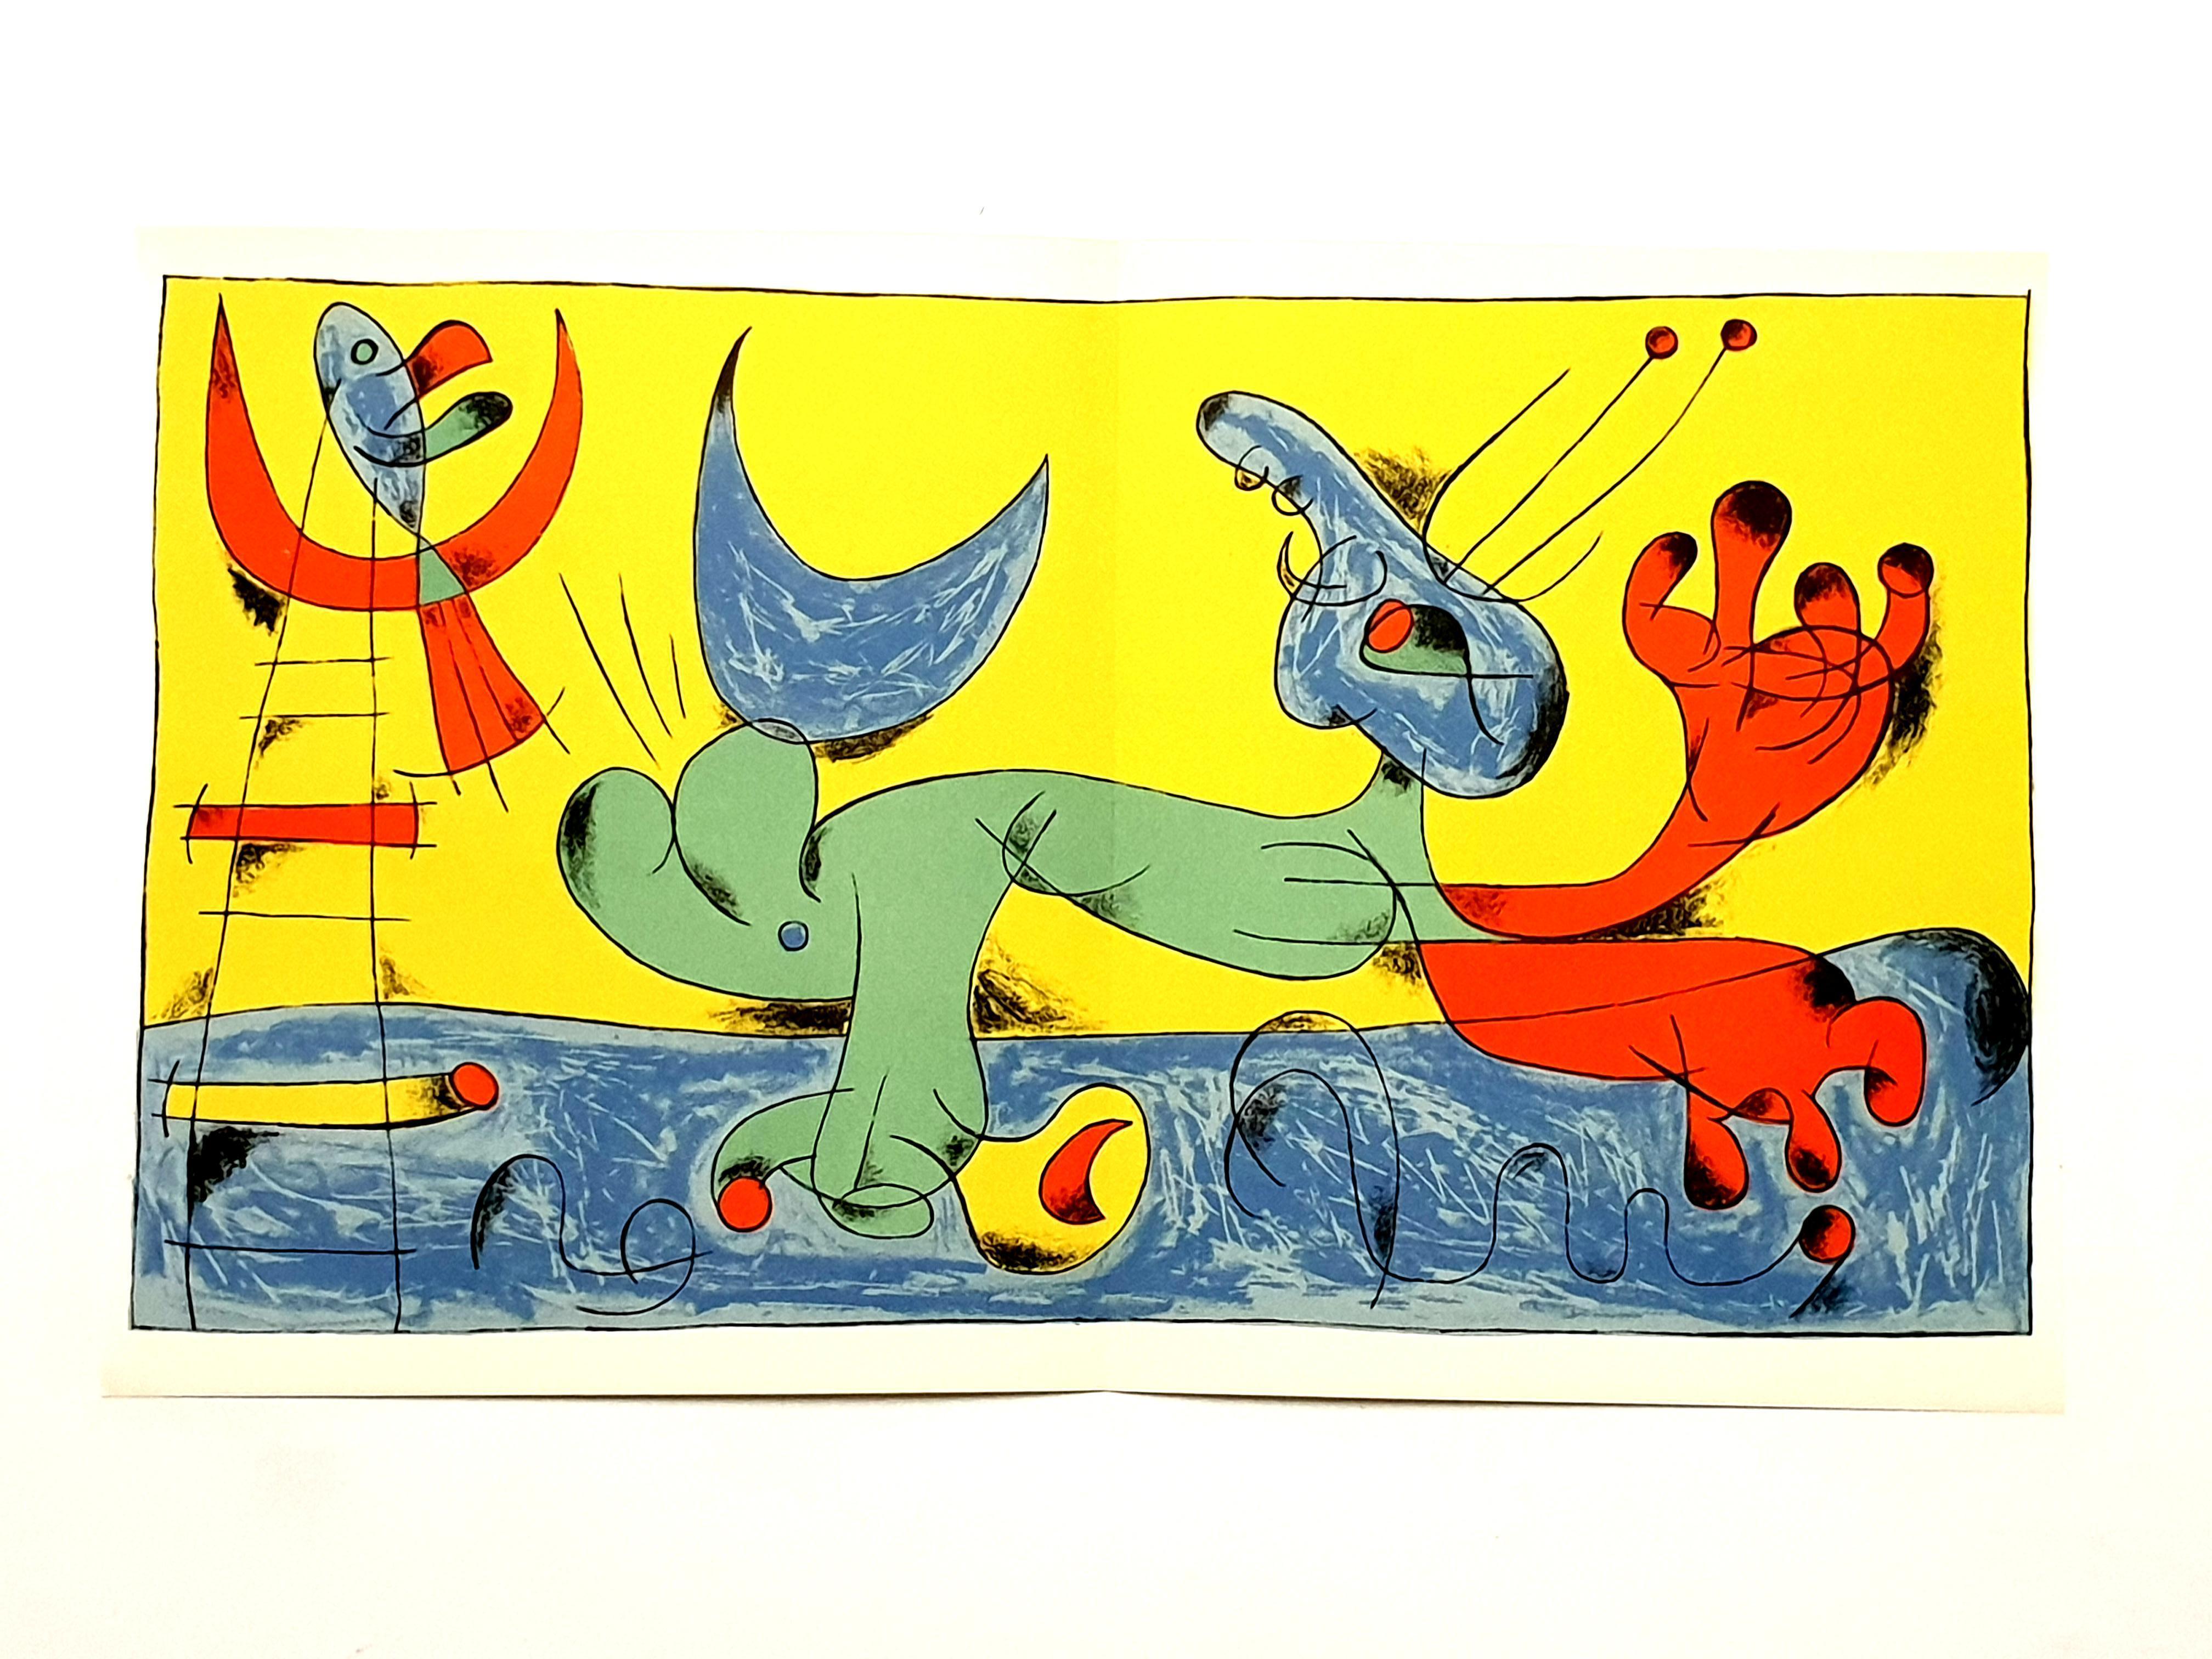 Joan Miro - Playing Dog - Lithograph in Colors
Artist: Joan Miro
Composition 7 for the book “Joan Miro” by Jacques Prevert
Editor: Maeght
Year: 1956
Dimensions: 23 x 38 cm
Reference: Mourlot 238
Condition: with the usual central